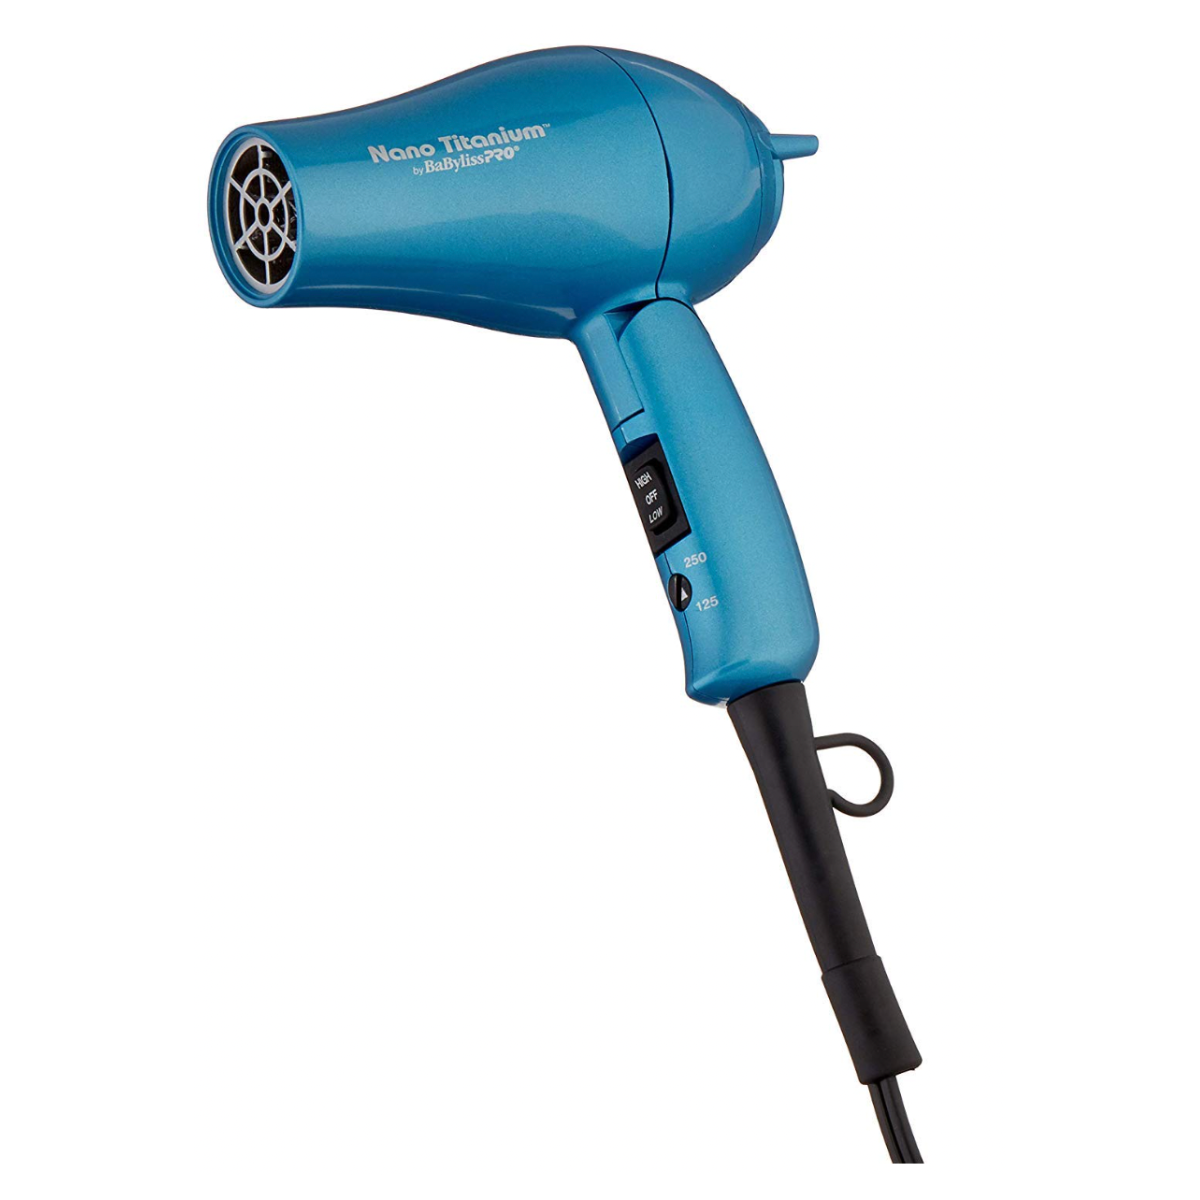 <p>For those who like a super sleek blowout, this lightweight and ergonomic travel dryer delivers. It features six heat and speed settings for customization, but its real claim to fame is a combination of a high torque DC motor, nano titanium heat technology, and a true ion generator for even heat distribution and a faster frizz-free result.</p> <ul> <li><strong>Pros:</strong> Incredibly lightweight, multiple heat and speed settings, powerful motor</li> <li><strong>Cons:</strong> Not dual-voltage</li> <li><strong>Weight:</strong> 9.6 ounces</li> <li><strong>Dual Voltage:</strong> No</li> </ul> $35, Amazon. <a href="https://www.amazon.com/BaByliss-BABNT053T-Titanium-Travel-Dryer/dp/B0041QZOF0">Get it now!</a><p>Sign up for today’s biggest stories, from pop culture to politics.</p><a href="https://www.glamour.com/newsletter/news?sourceCode=msnsend">Sign Up</a>